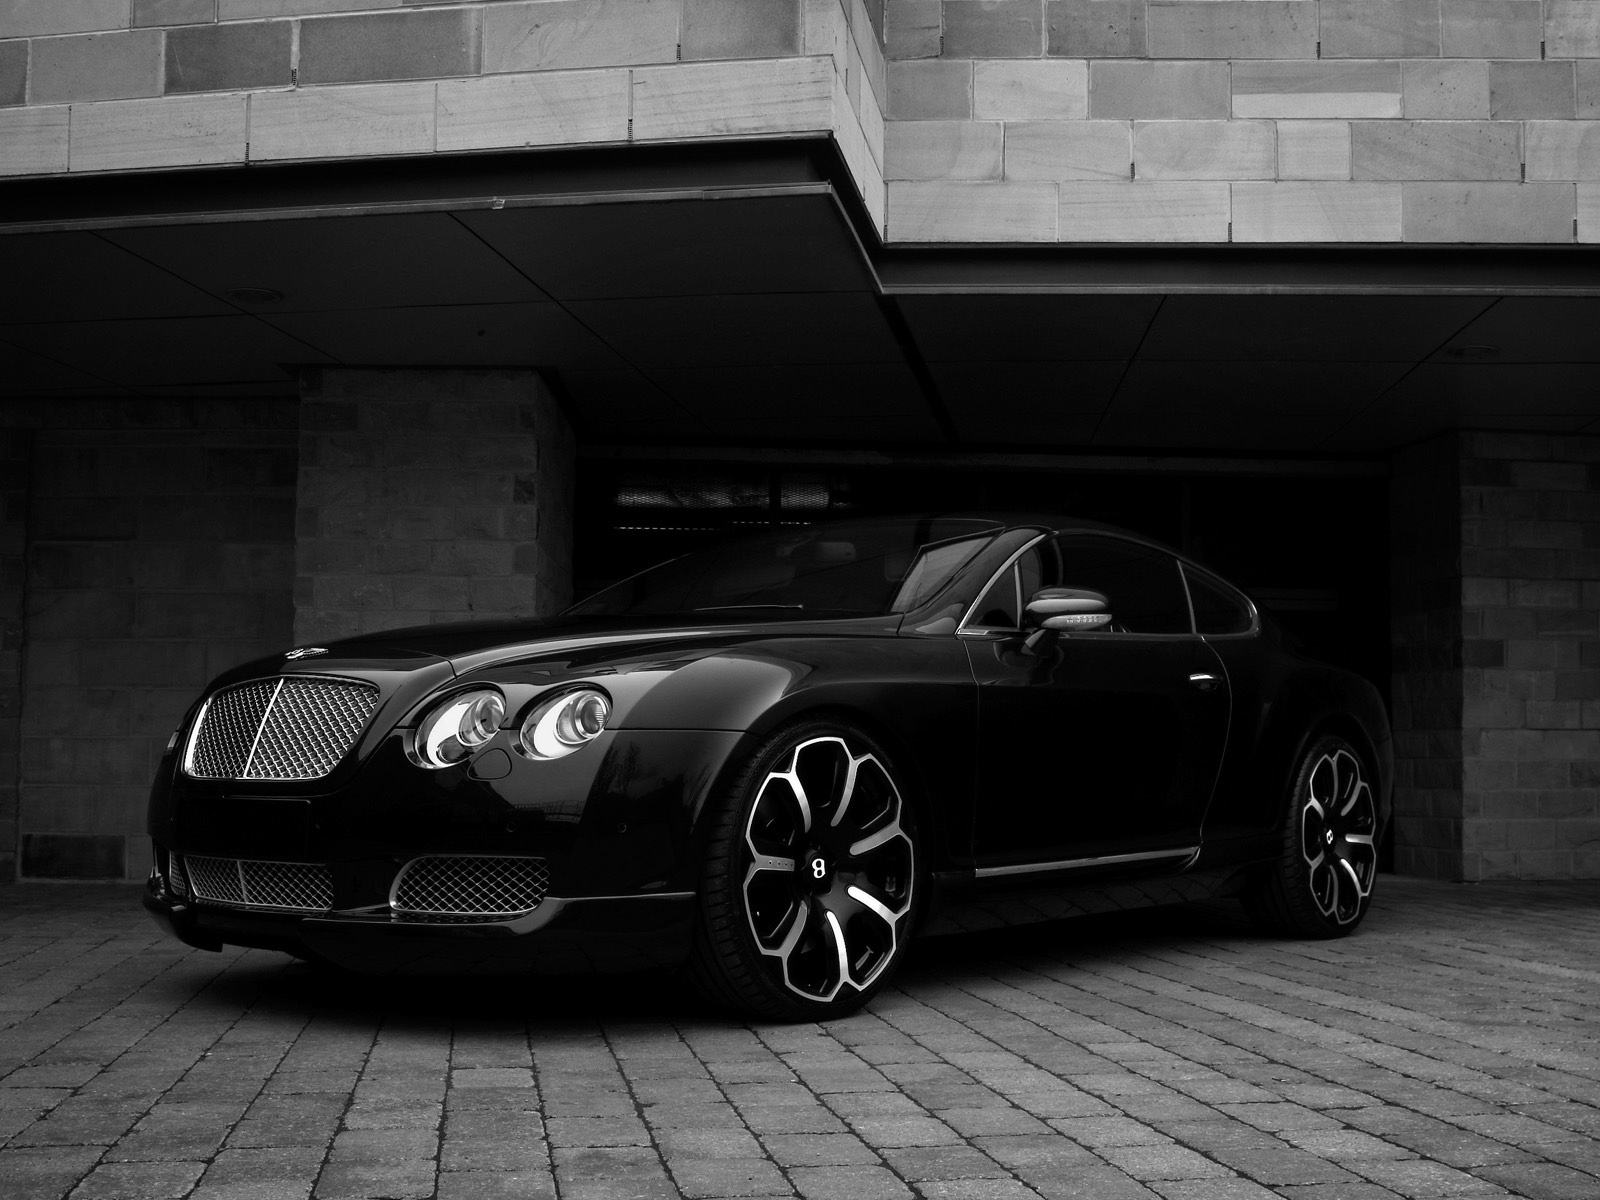 Bentley GTS Black Edition Project Kahn 2008 Overhang for 1600 x 1200 resolution